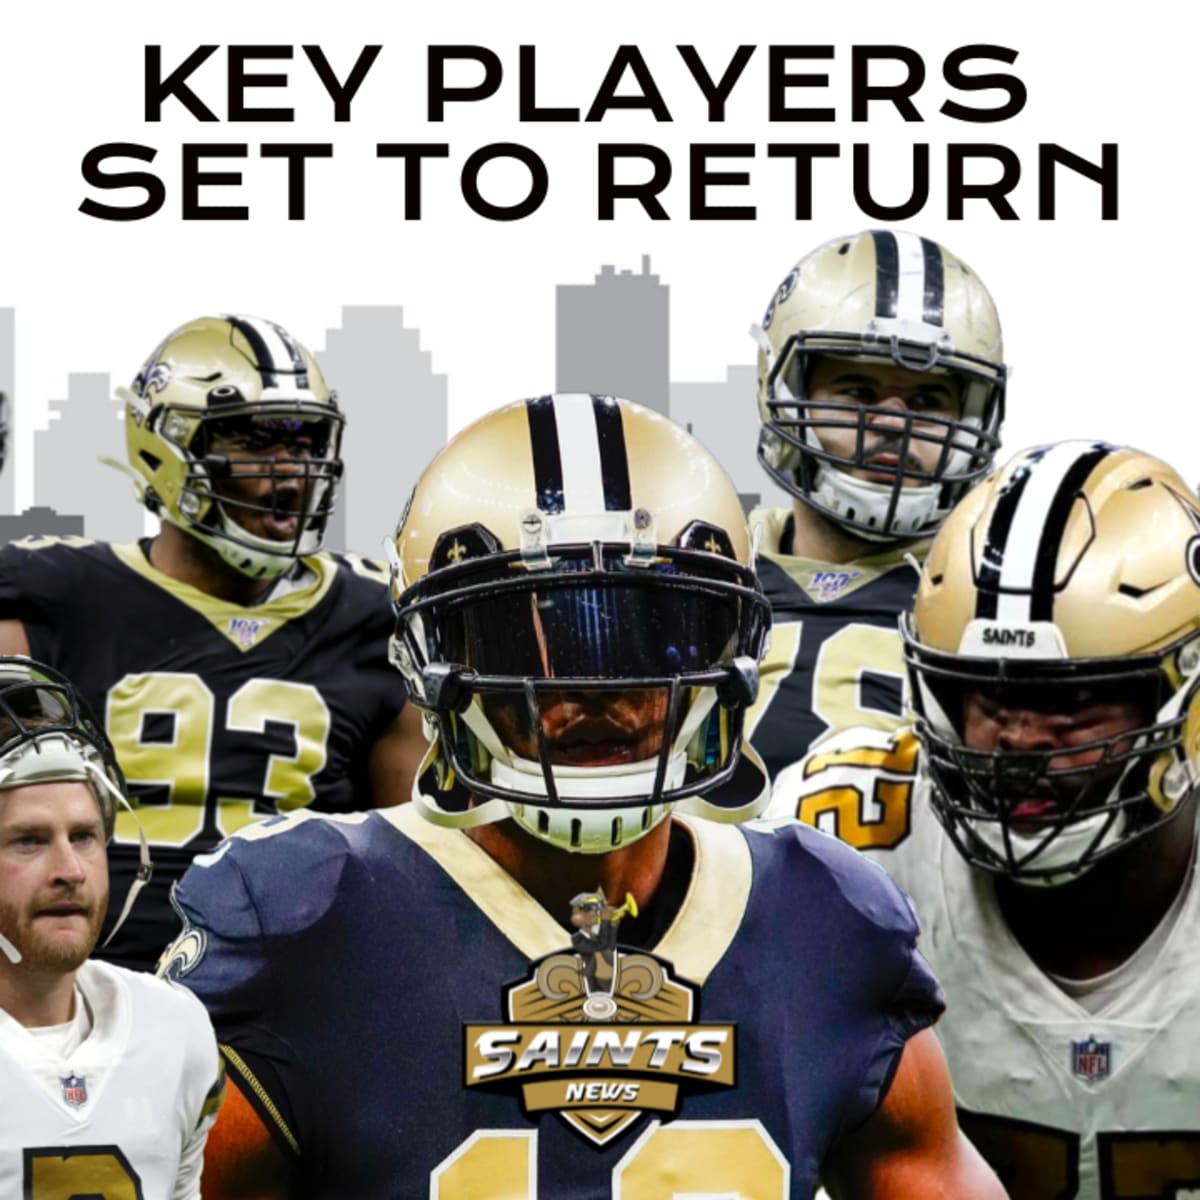 new orleans saints news today